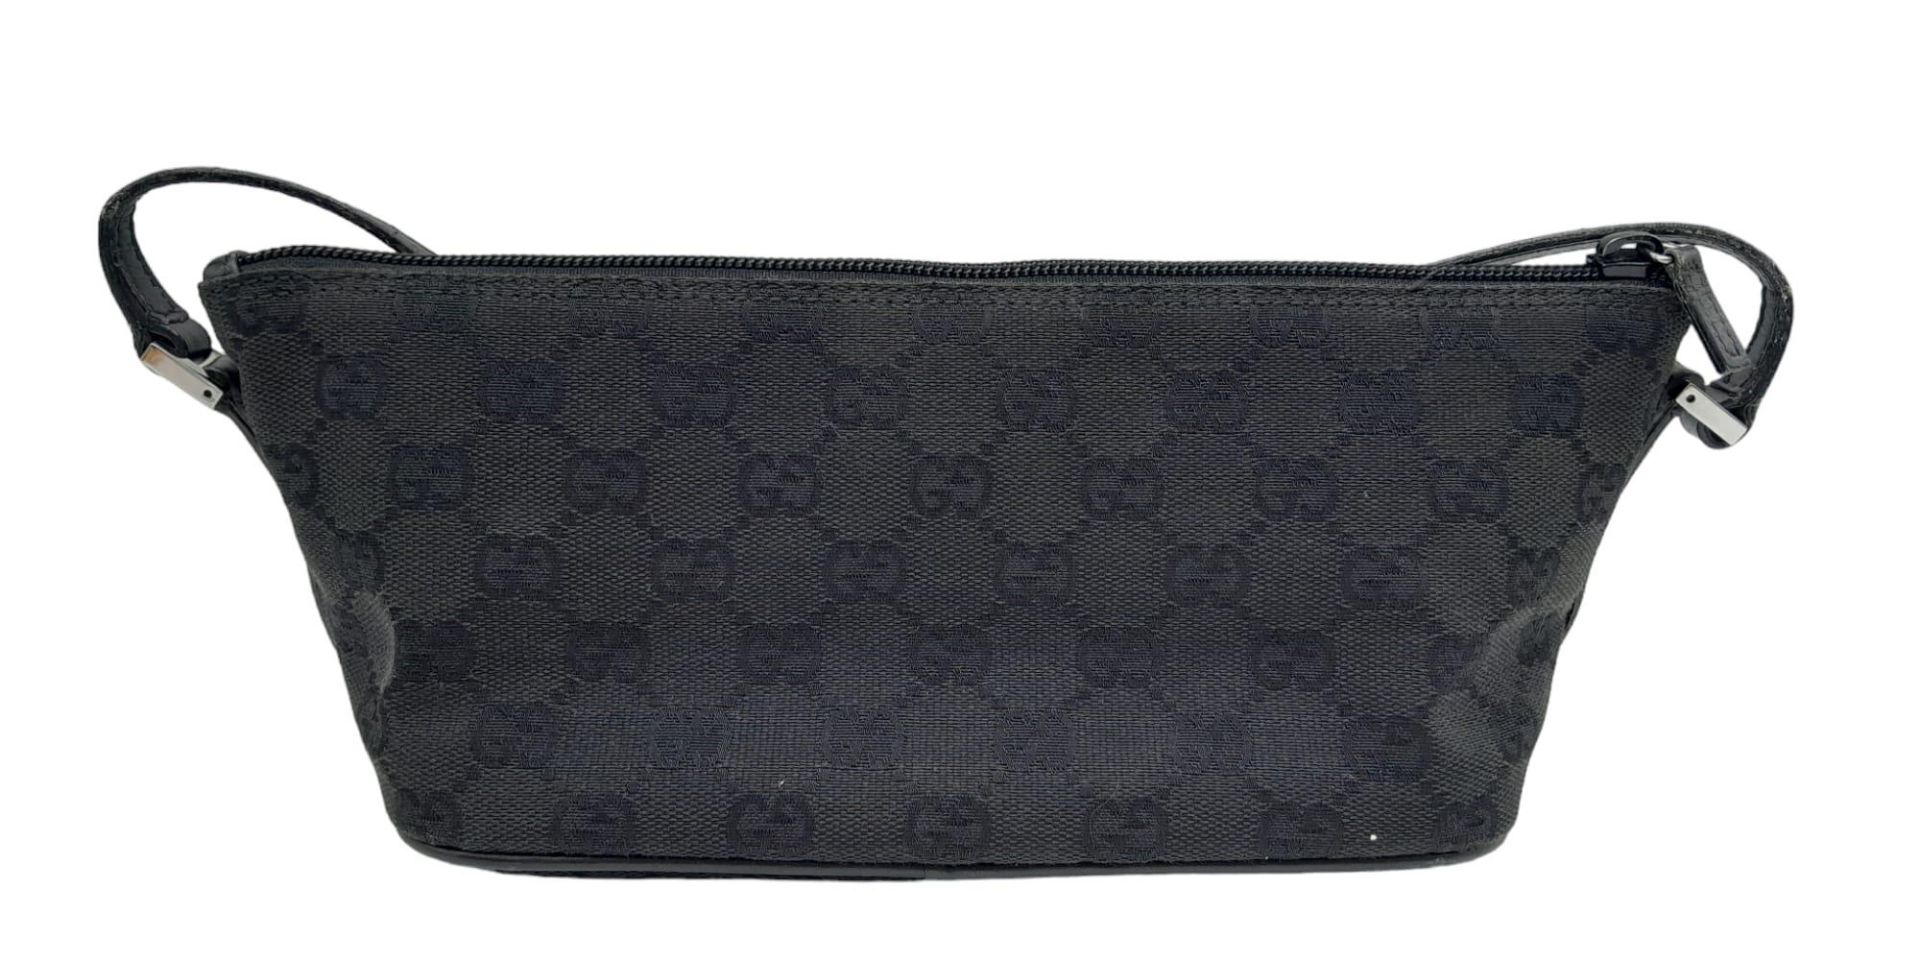 A Gucci Black Monogram Pochette Boat Bag. Textile exterior with black and silver-toned hardware, - Image 3 of 7